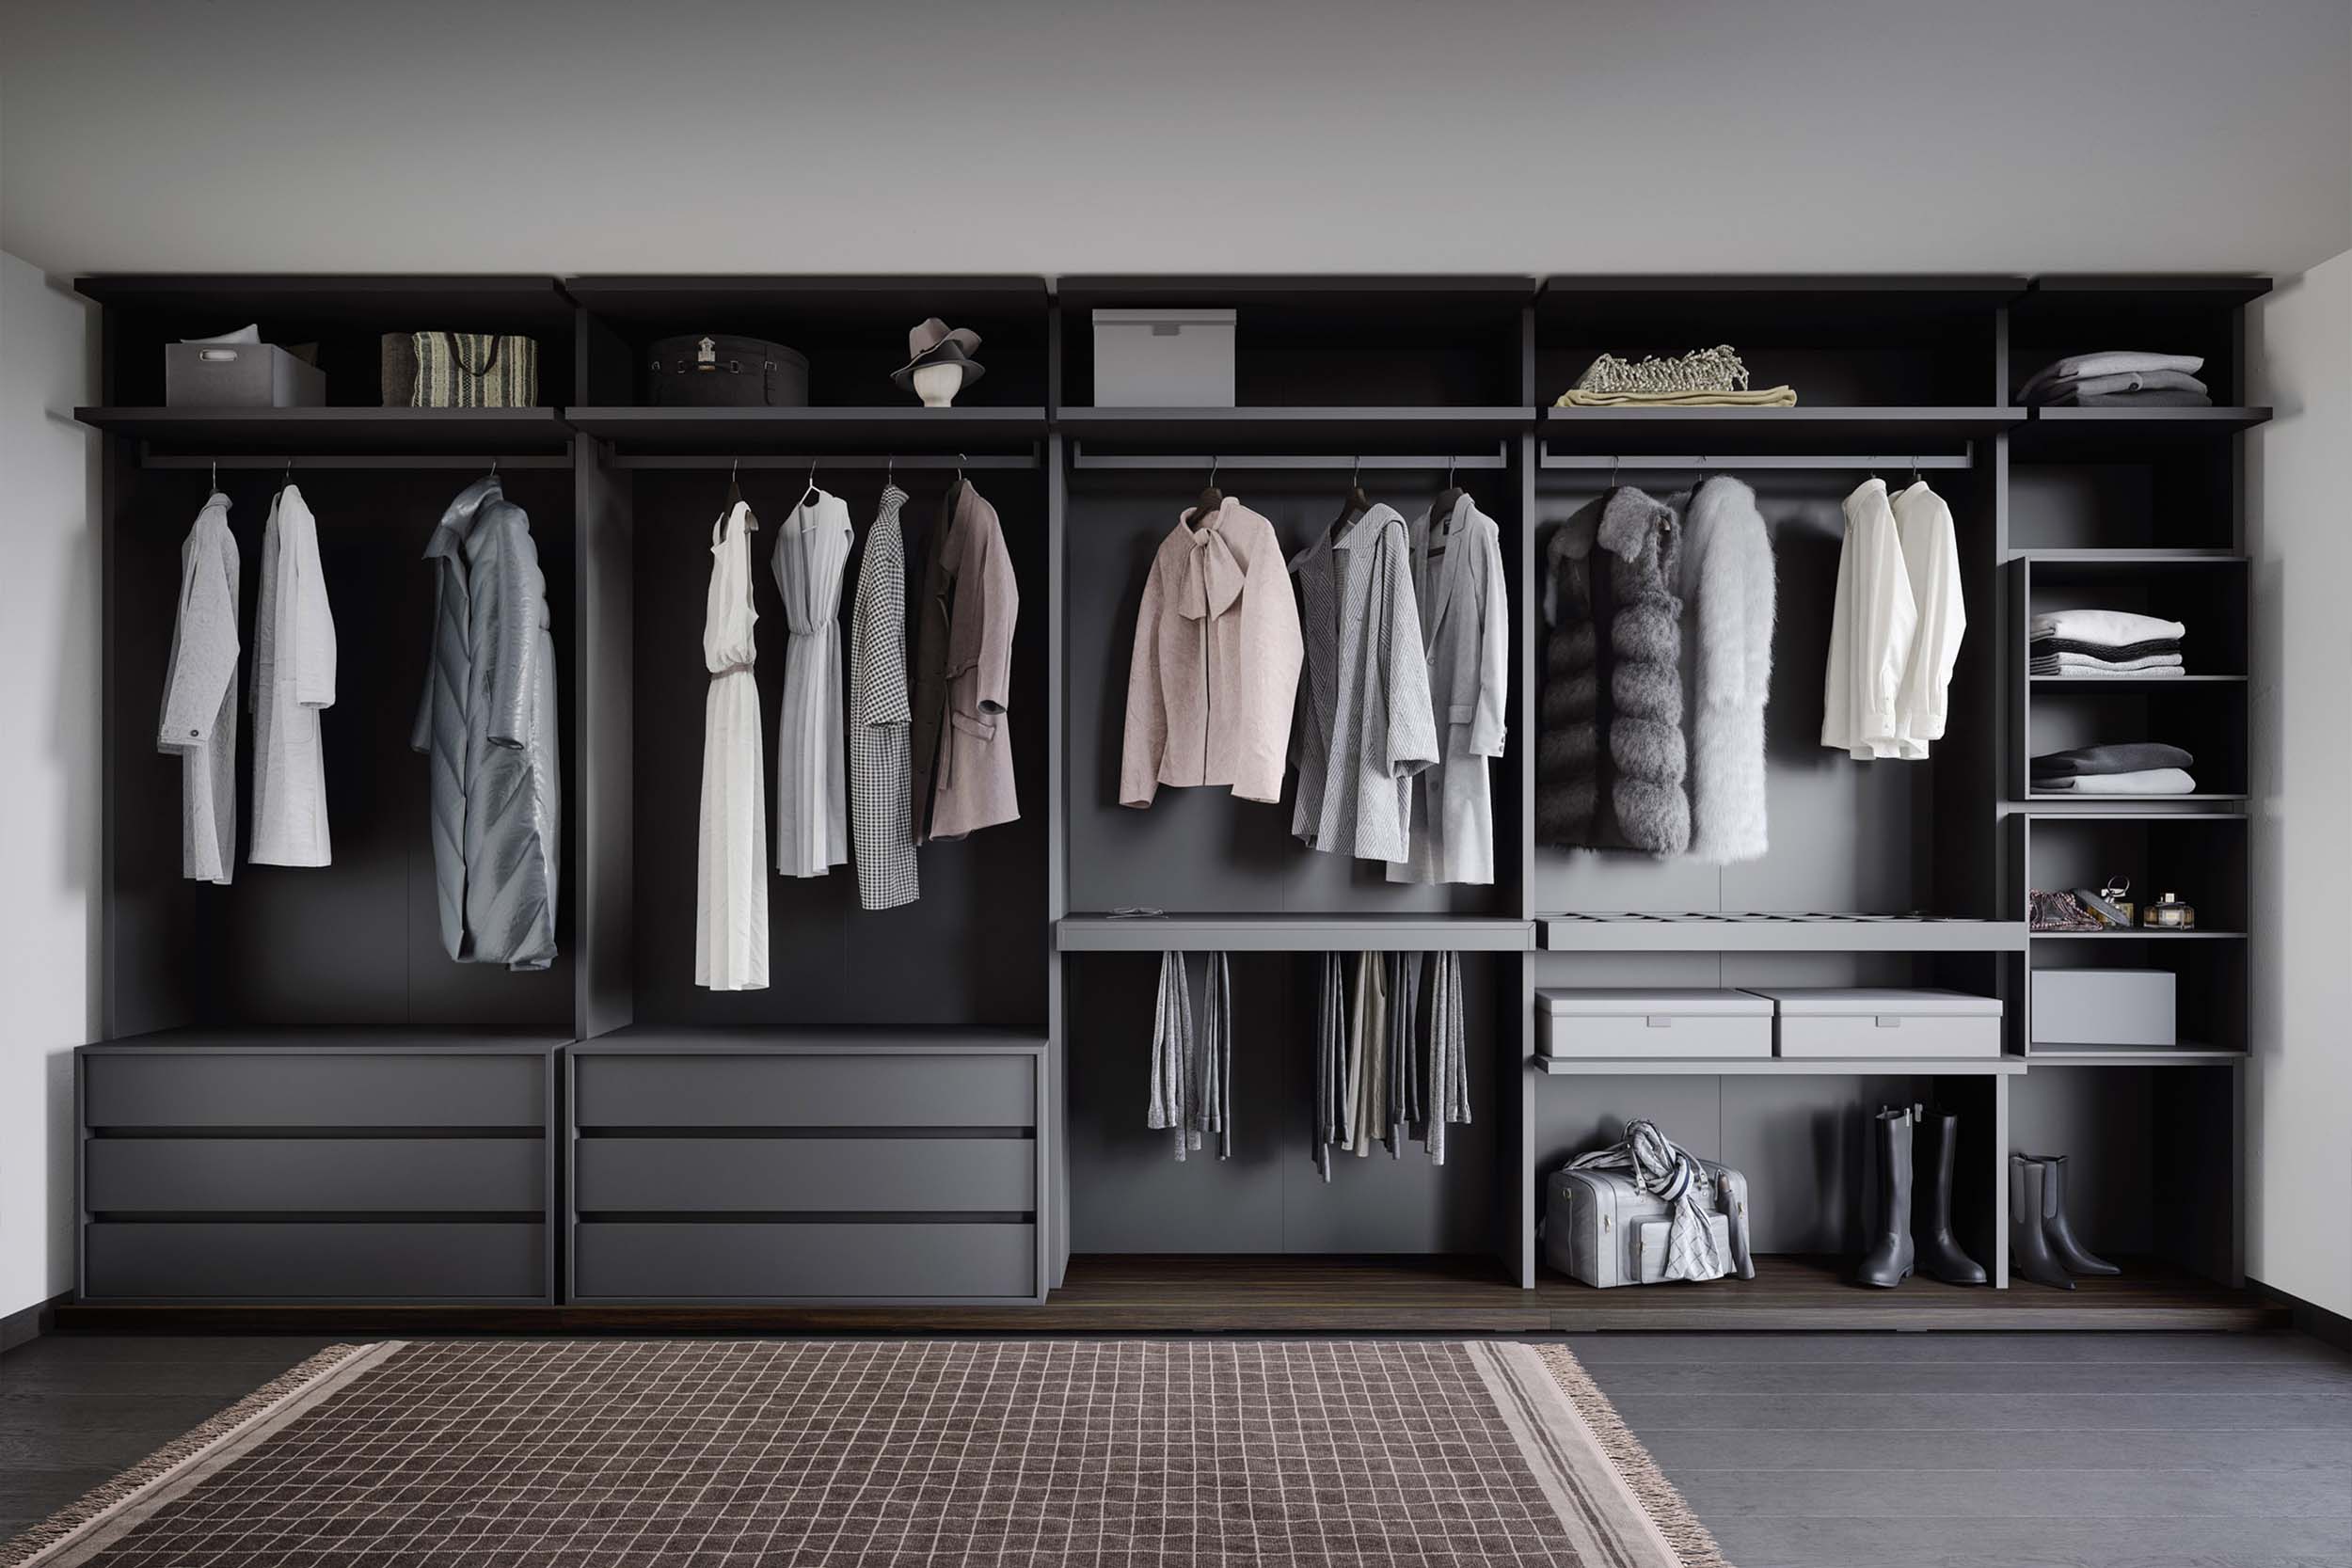 Designer luxury walk-in wardrobes system elements, fitted to your bedroom by Krieder UK.